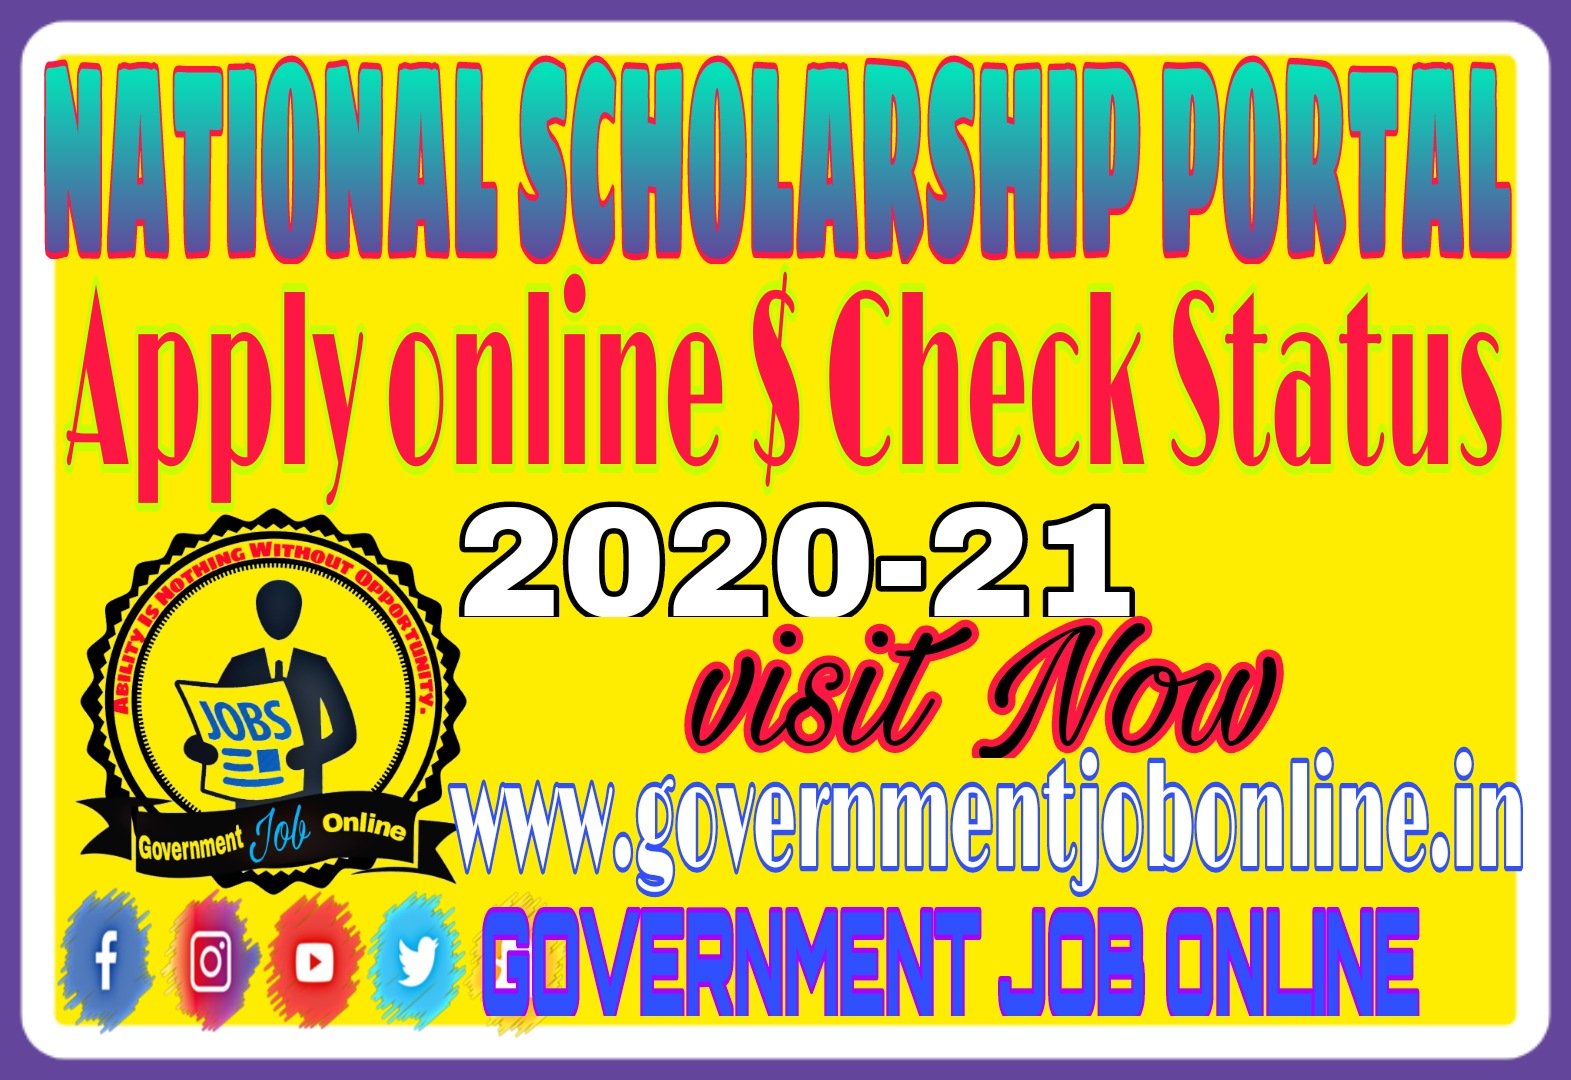 National Scholarship Apply Online And Check Status 2020-21